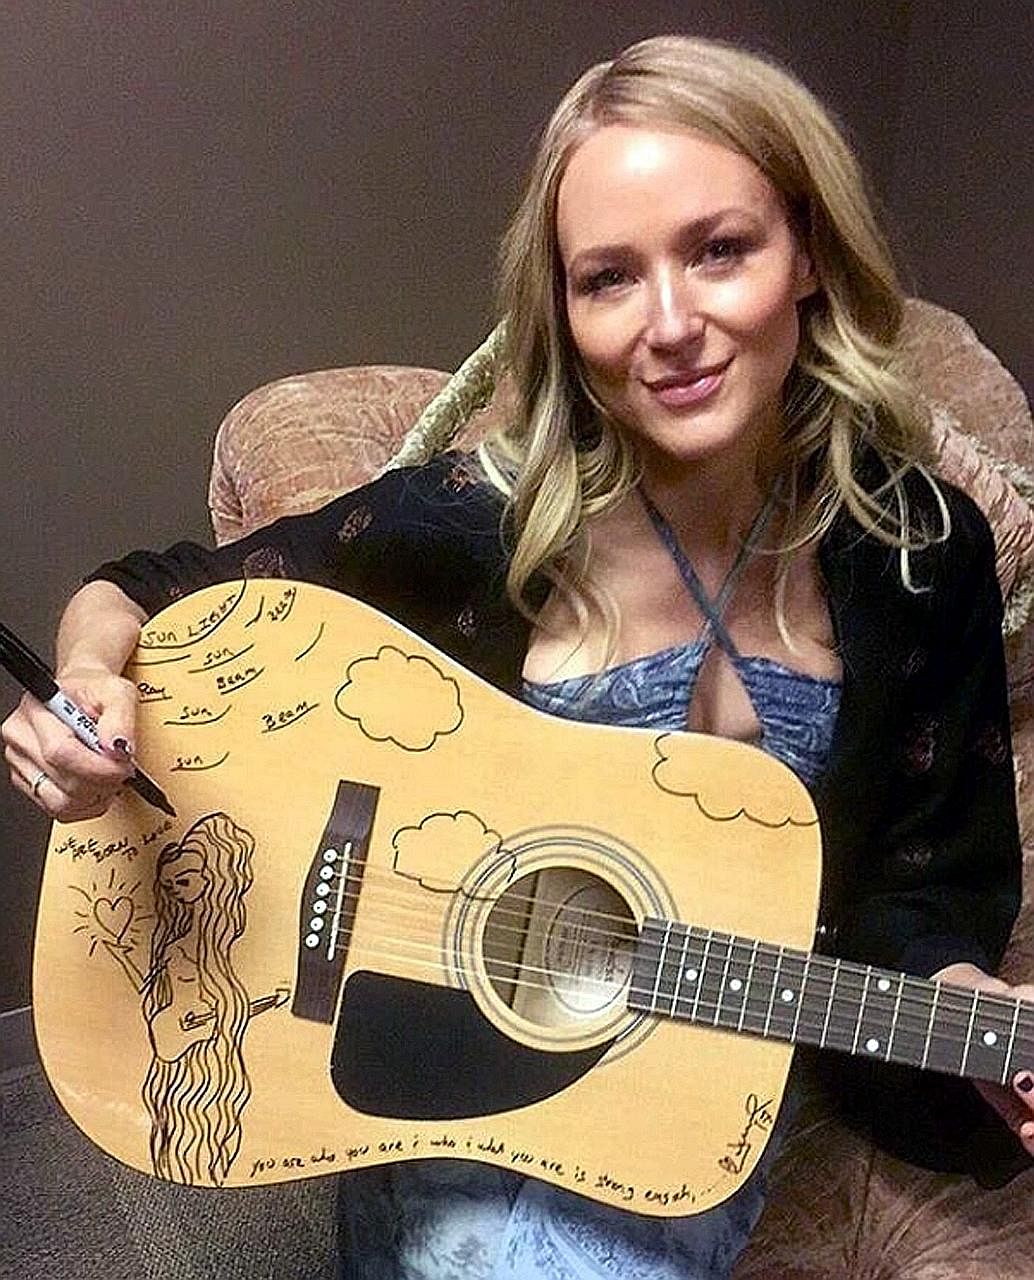 On the music front, Jewel is on tour with her family by her side and she is also working with Cirque du Soleil to present a biographical one-night show in March.